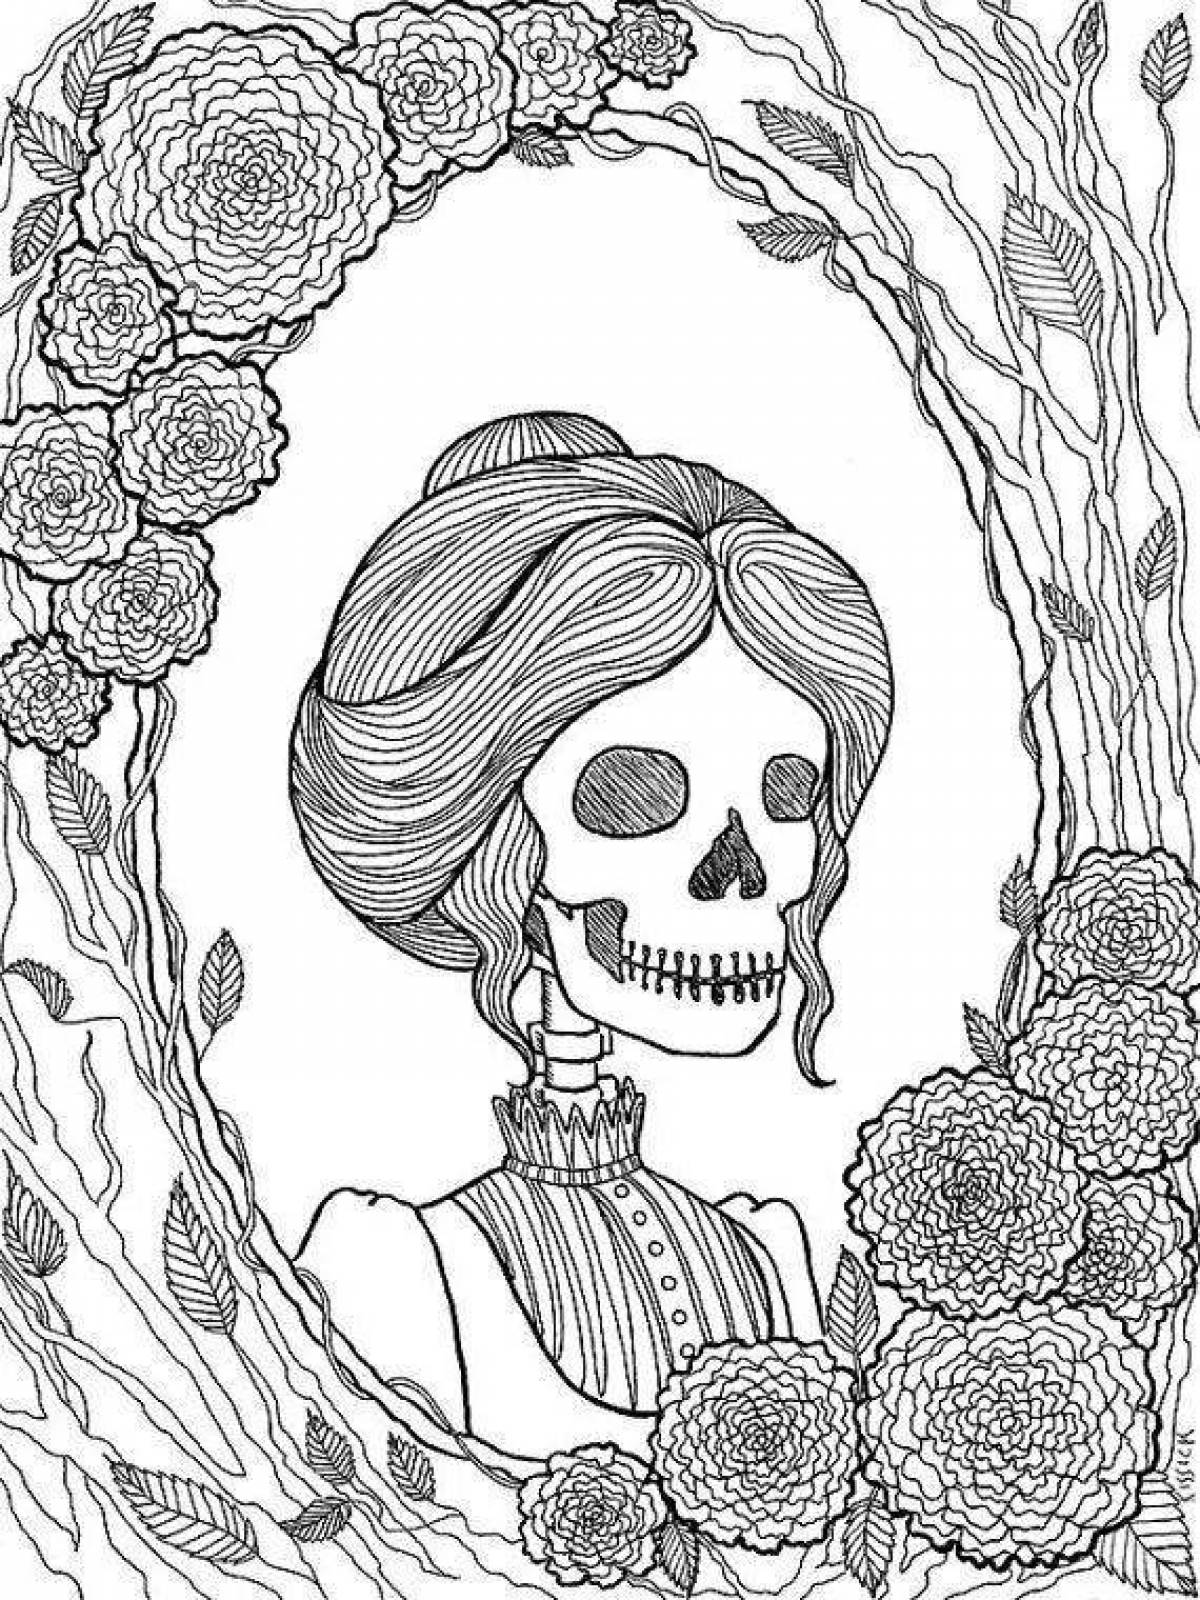 Scary But Beautiful Coloring Page: Horrible